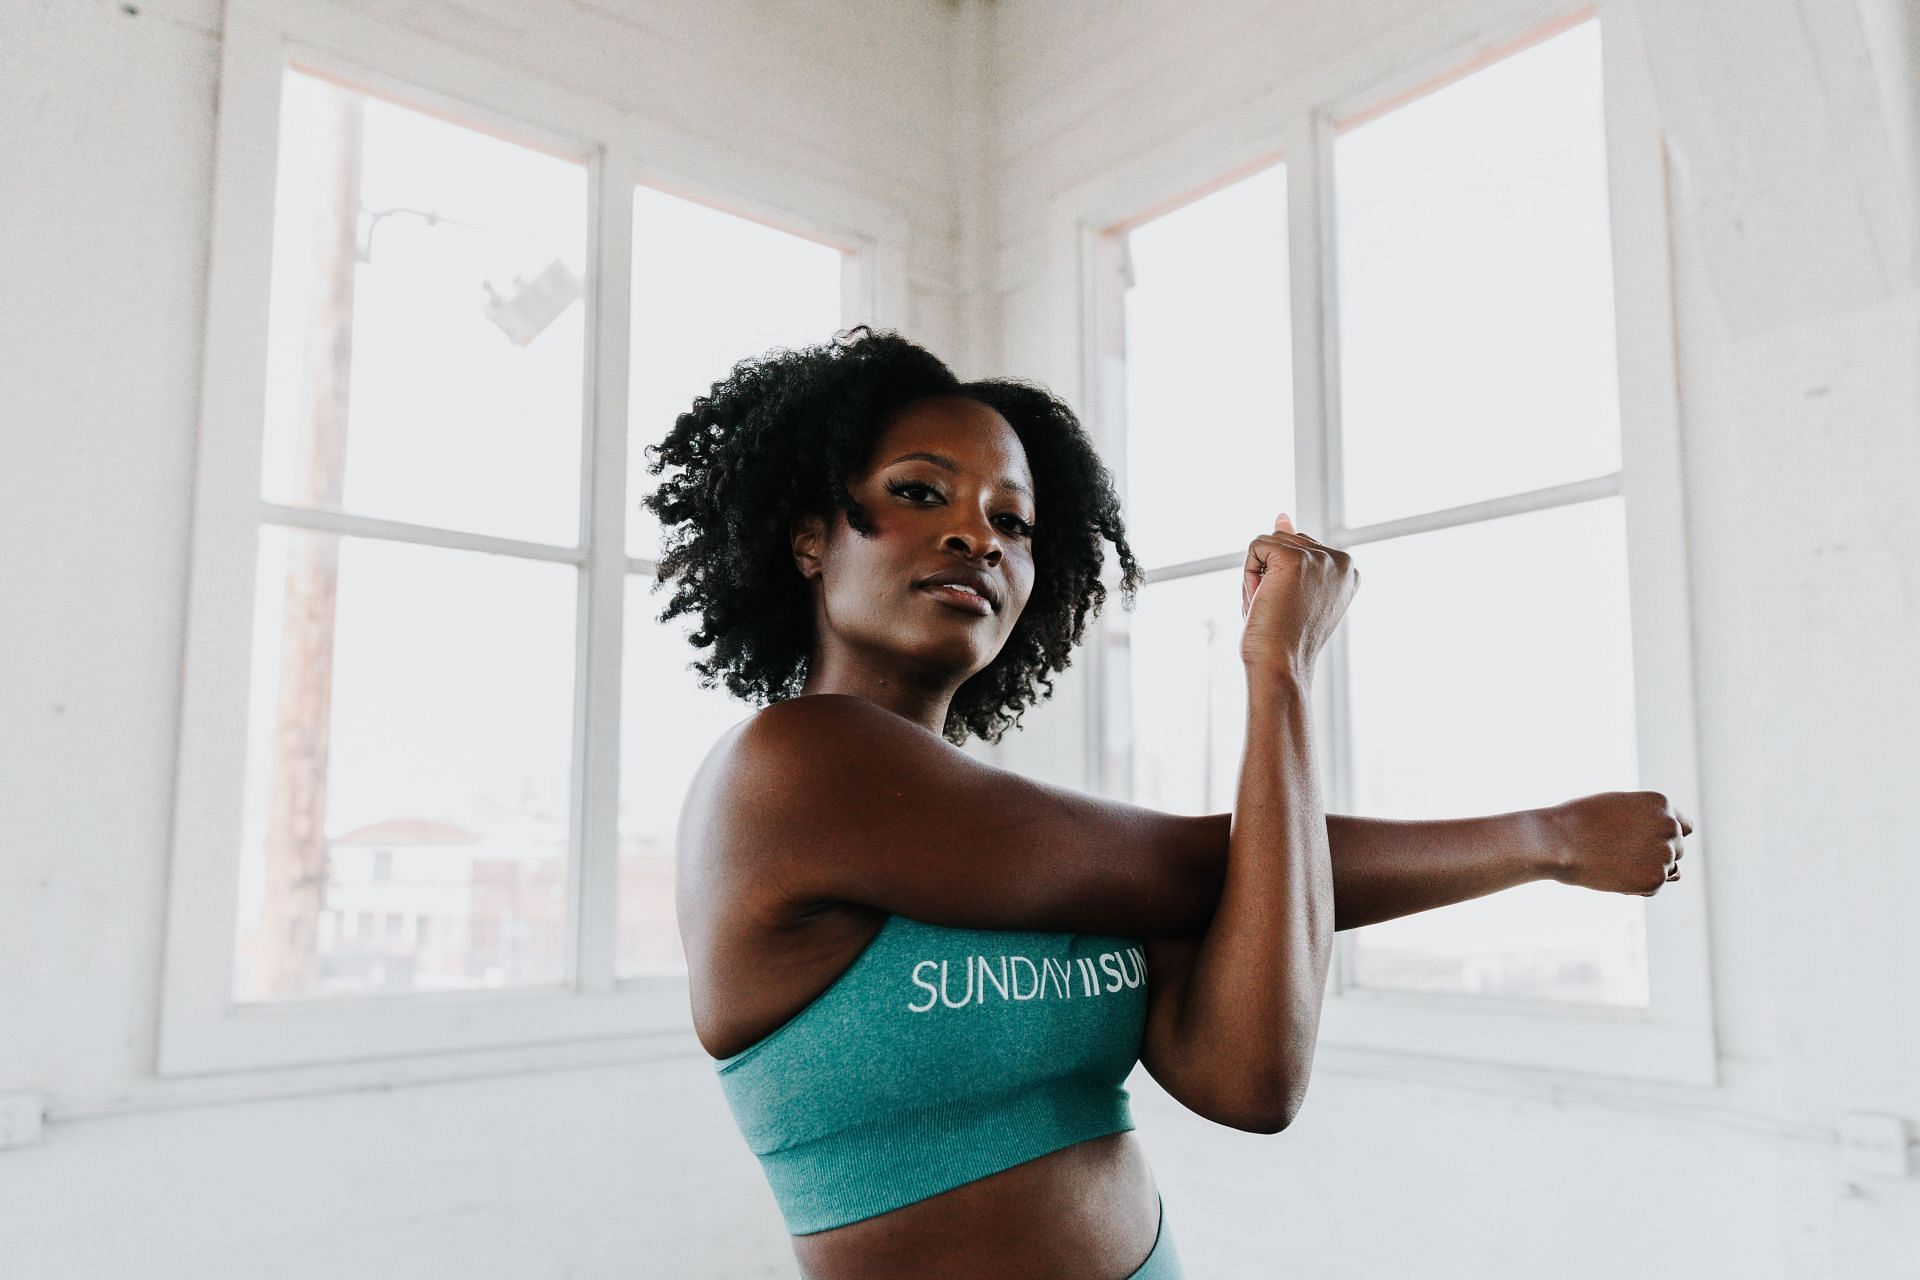 Daily workout can help strengthen and improve overall fitness. (Image via Unsplash / Sunday ii Sunday)